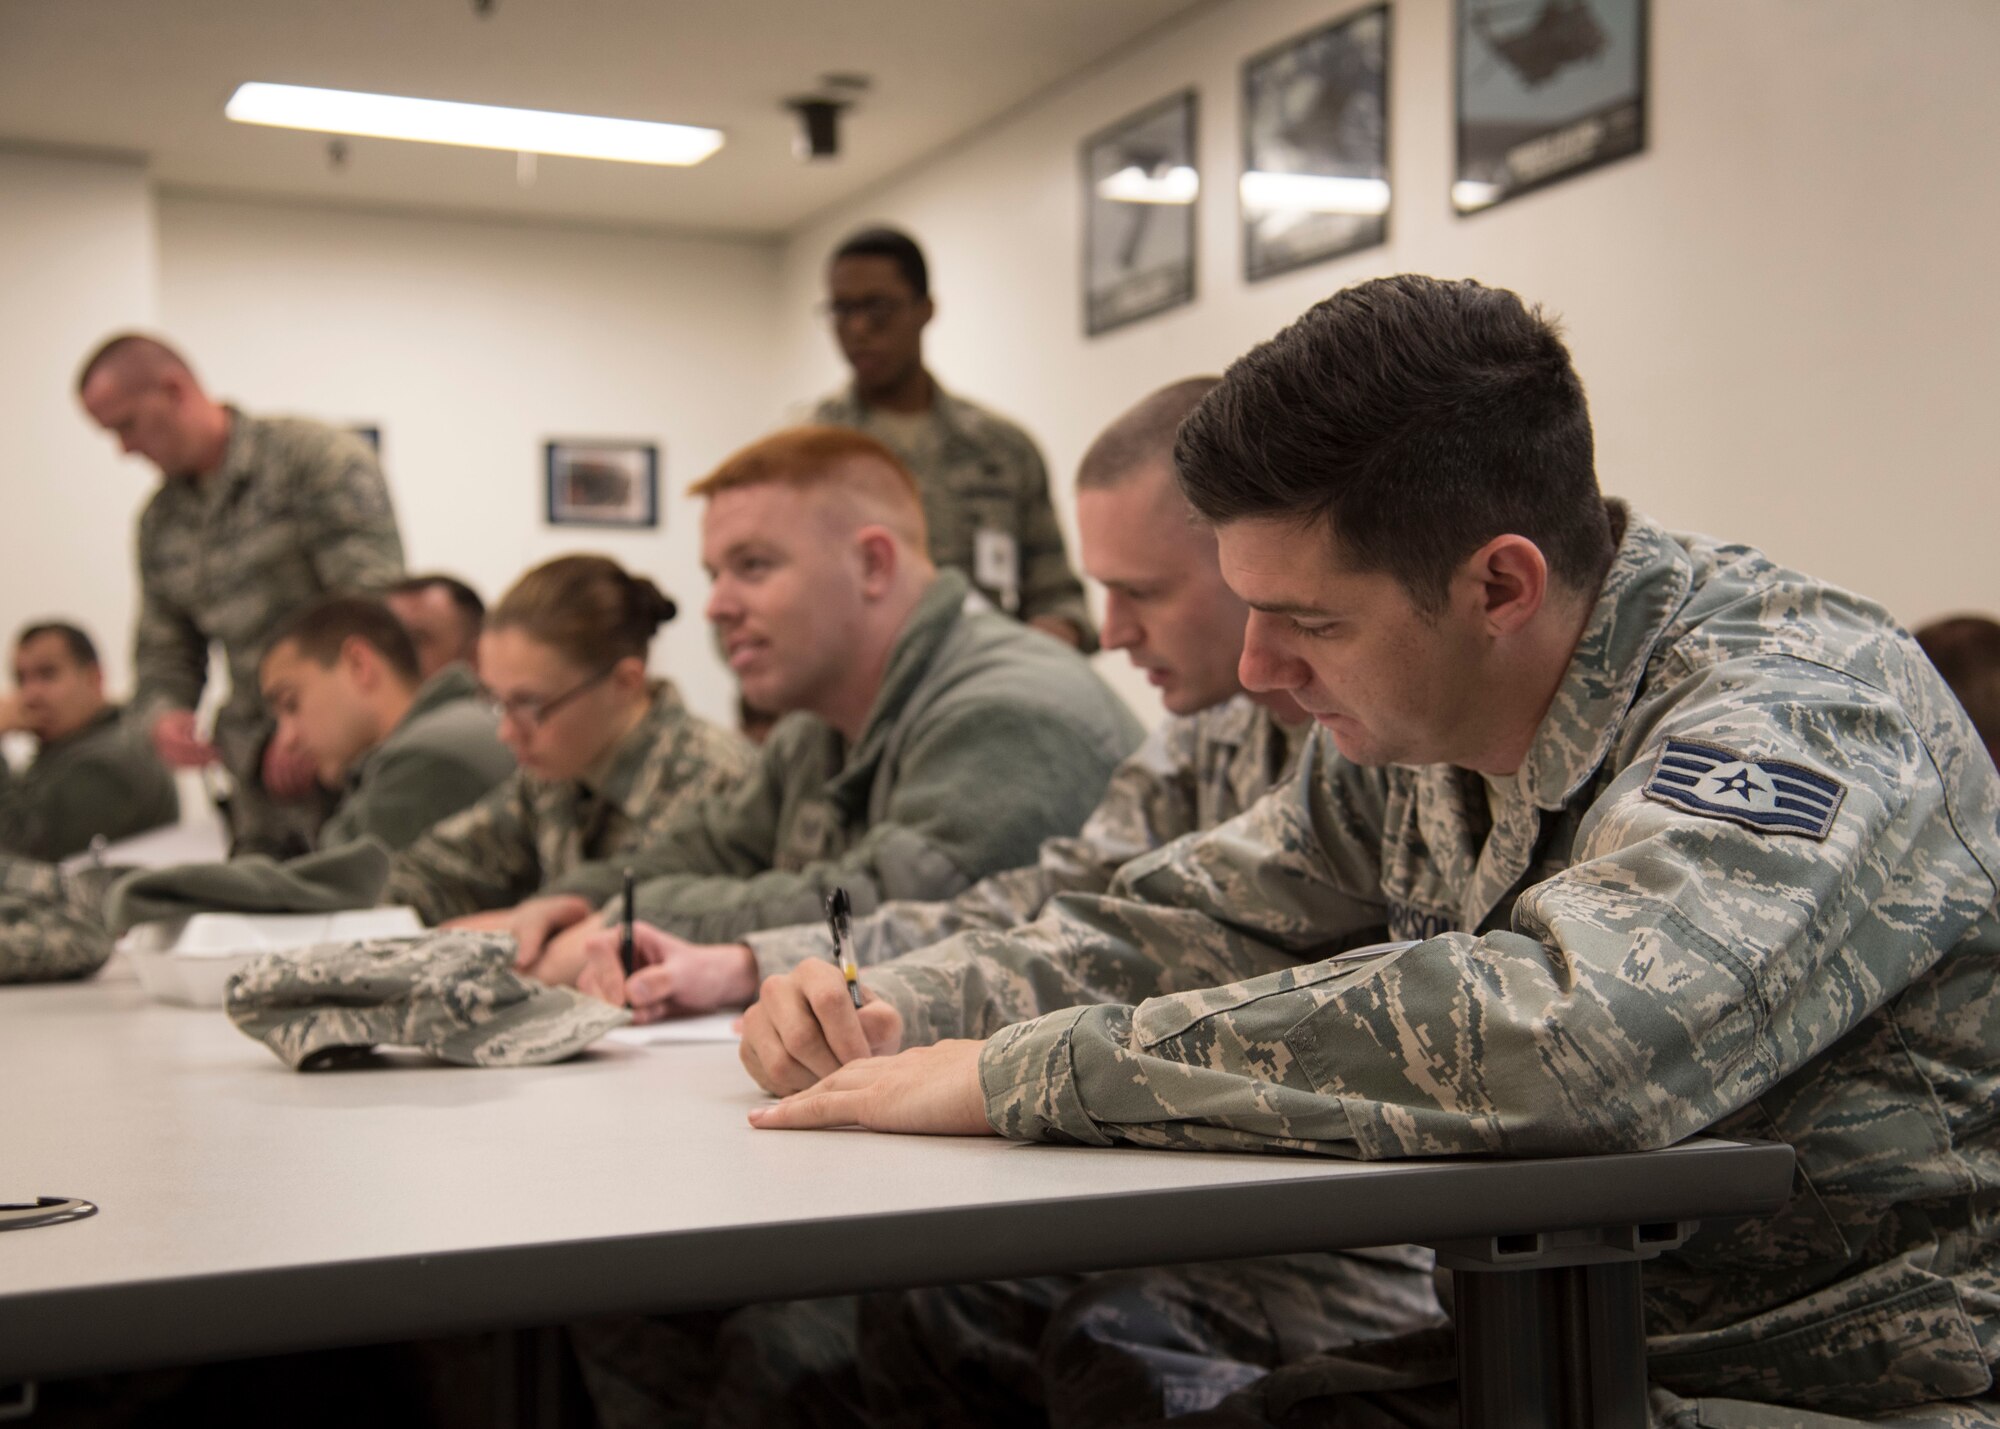 U.S. Air Force Airmen fill out deployment documents at Misawa Air Base, Japan, March 15, 2016. Upon the start of Beverly Sunrise 16-03, an operational readiness exercise, Airmen prepared for the mock deployment through a Personnel Deployment Function. This process ensured personnel possess all necessary paperwork and equipment, as well as confirming their medical records are up-to-date. (U.S. Air Force photo by Airman 1st Class Jordyn Fetter)